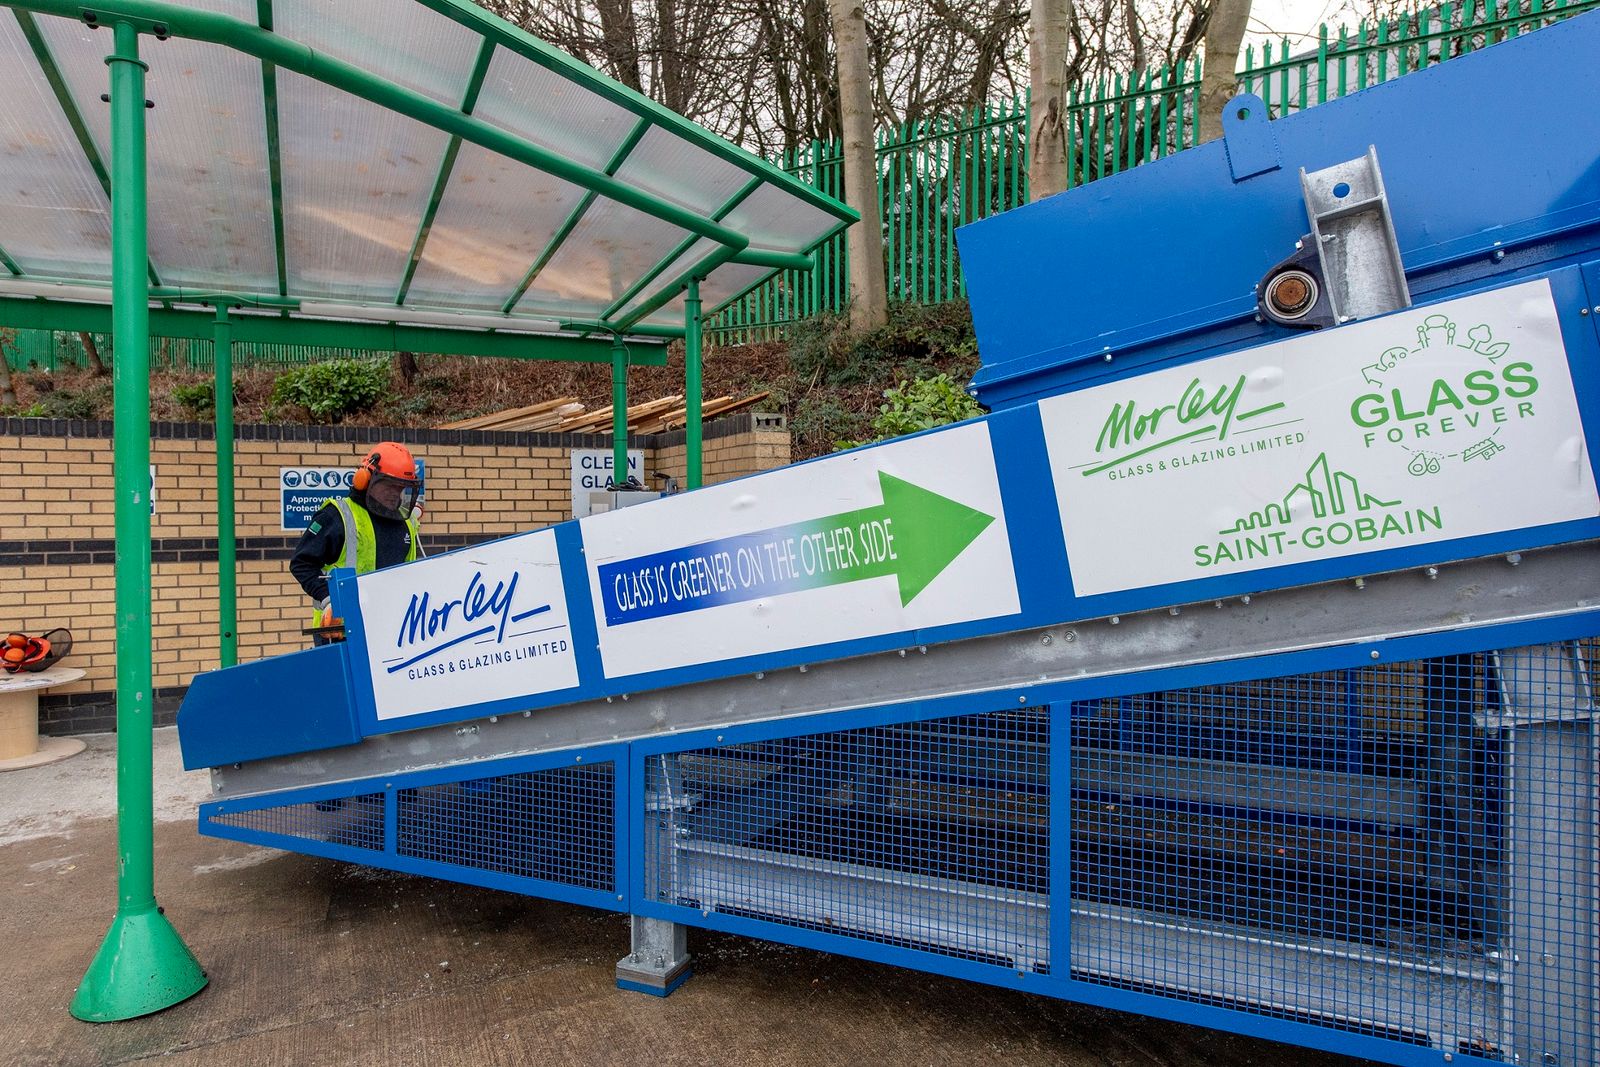 Firm launches free glass recycling service for local window installers